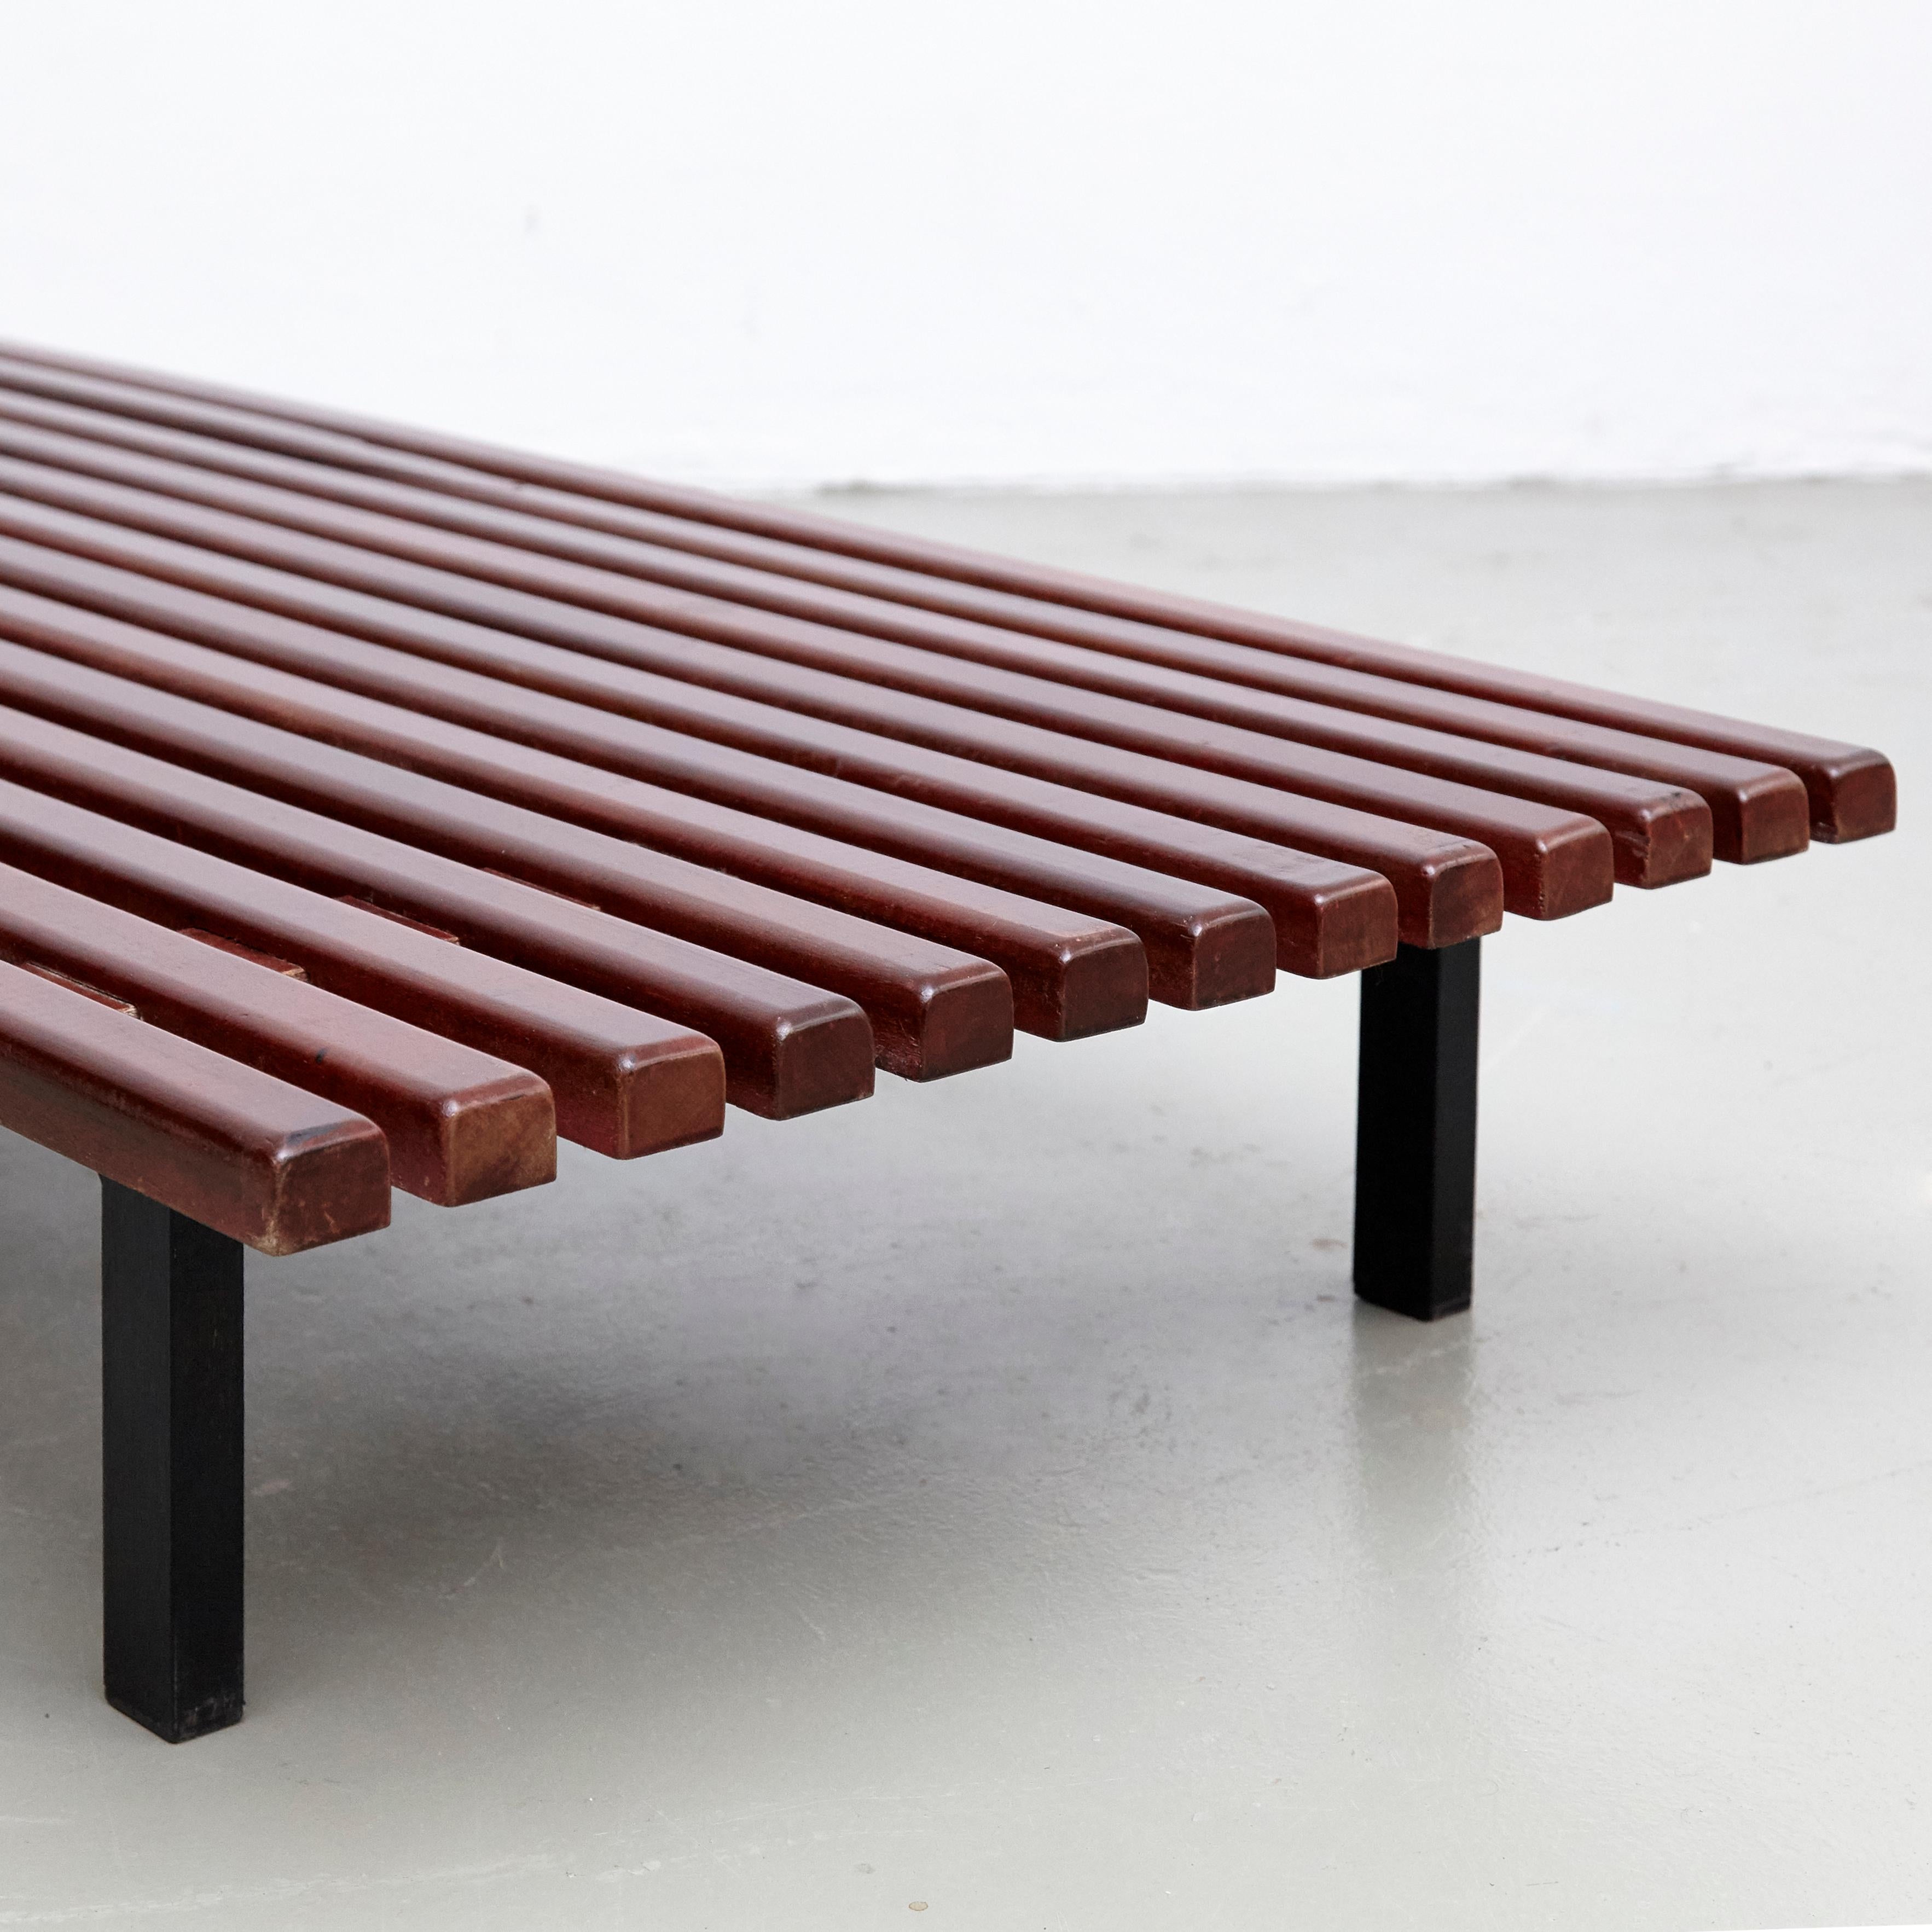 French Charlotte Perriand Mid-Century Modern Wood Metal Cansado Bench, circa 1950